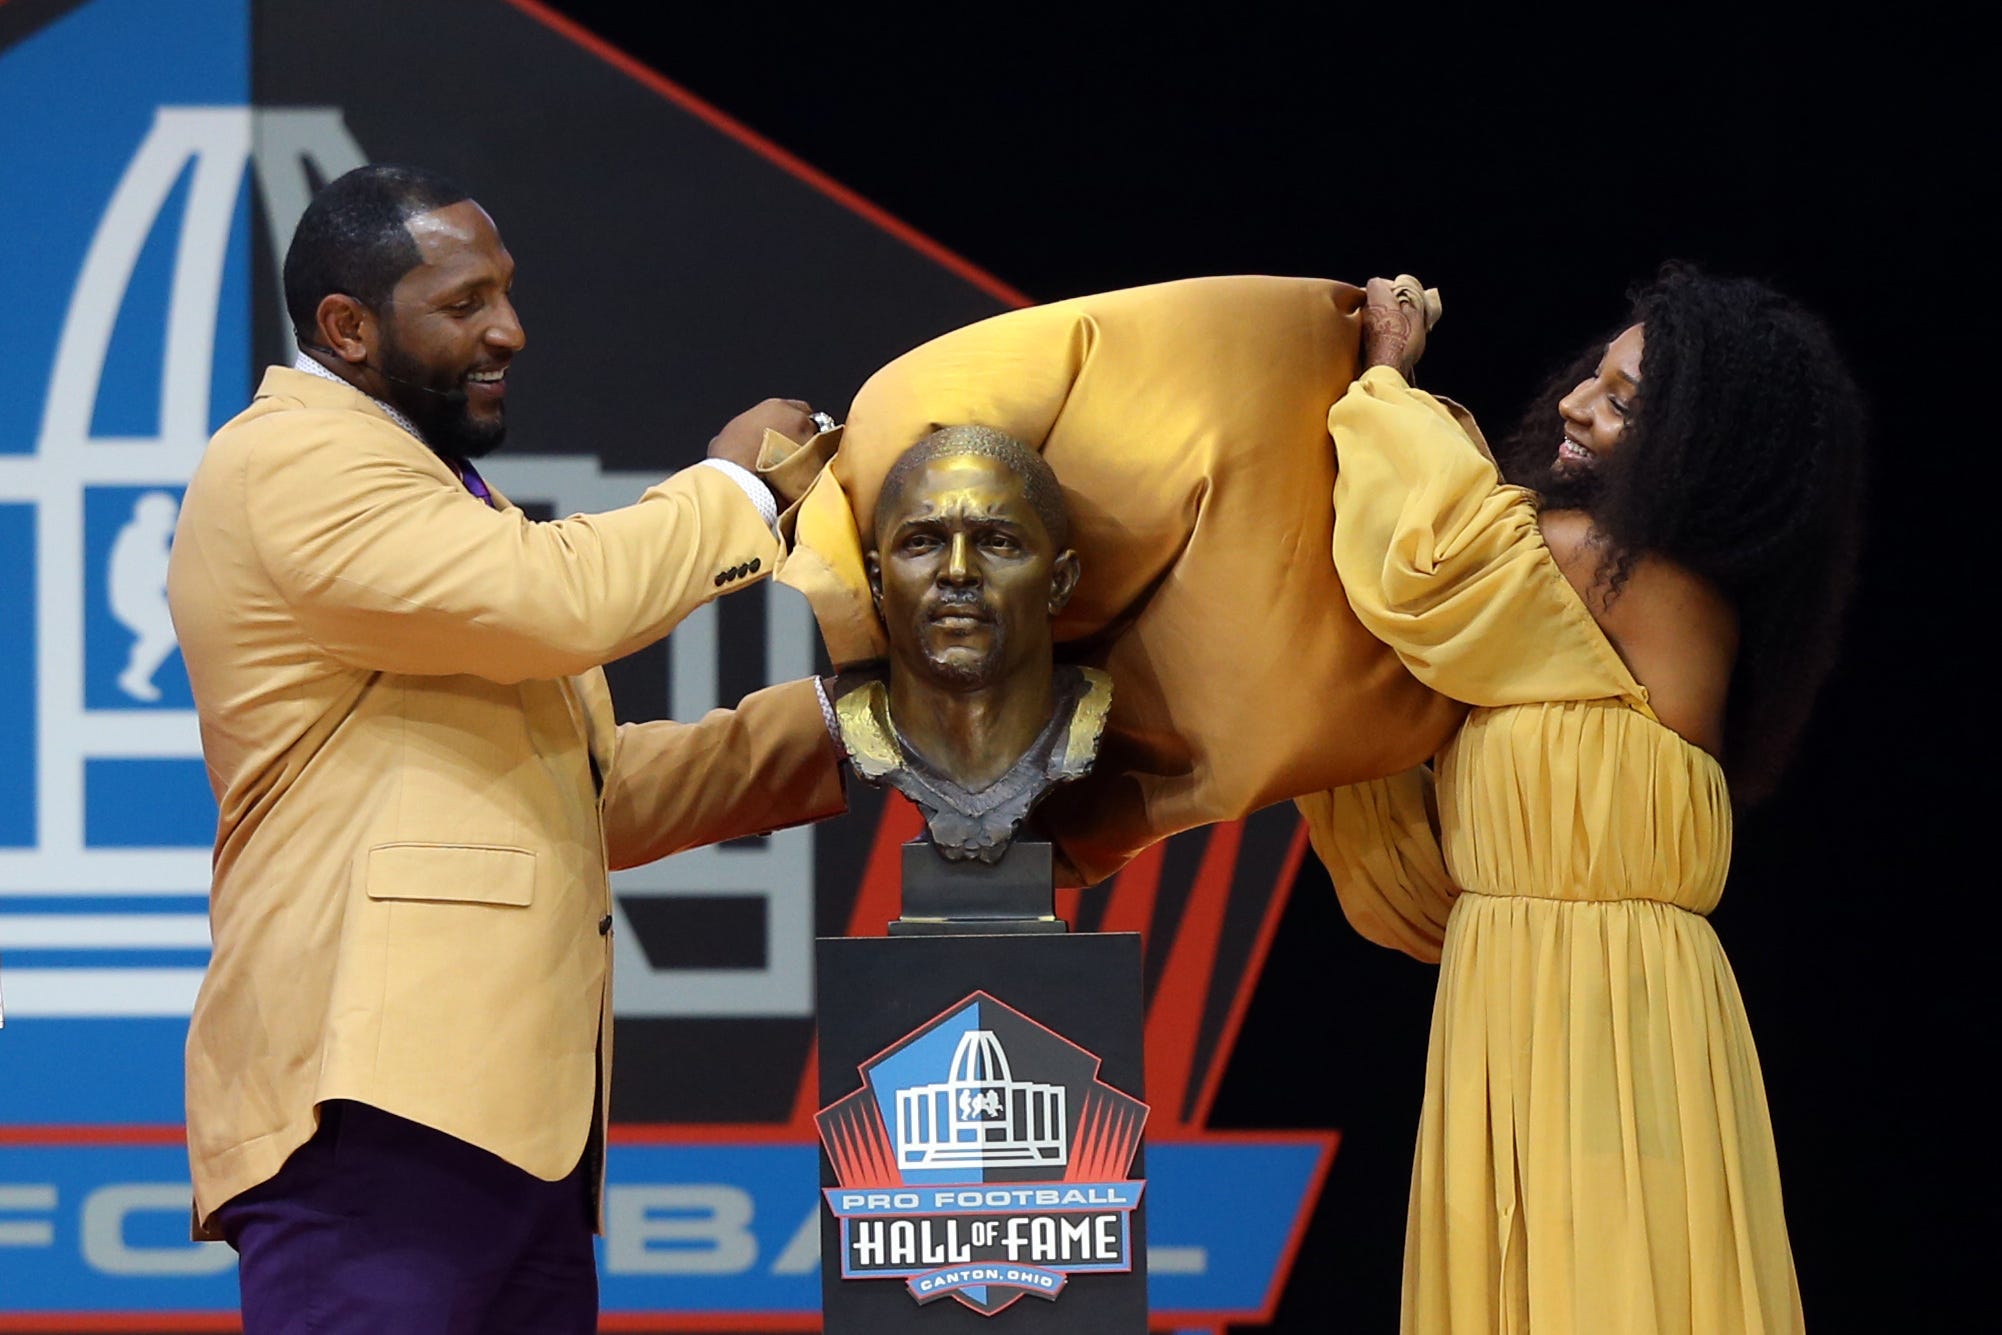 Pro Football Hall of Fame Class of 2018 enshrinee Ray Lewis stands with daughter Diaymon Lewis during the Pro Football Hall of Fame Enshrinement Ceremony at Tom Bensen Stadium.